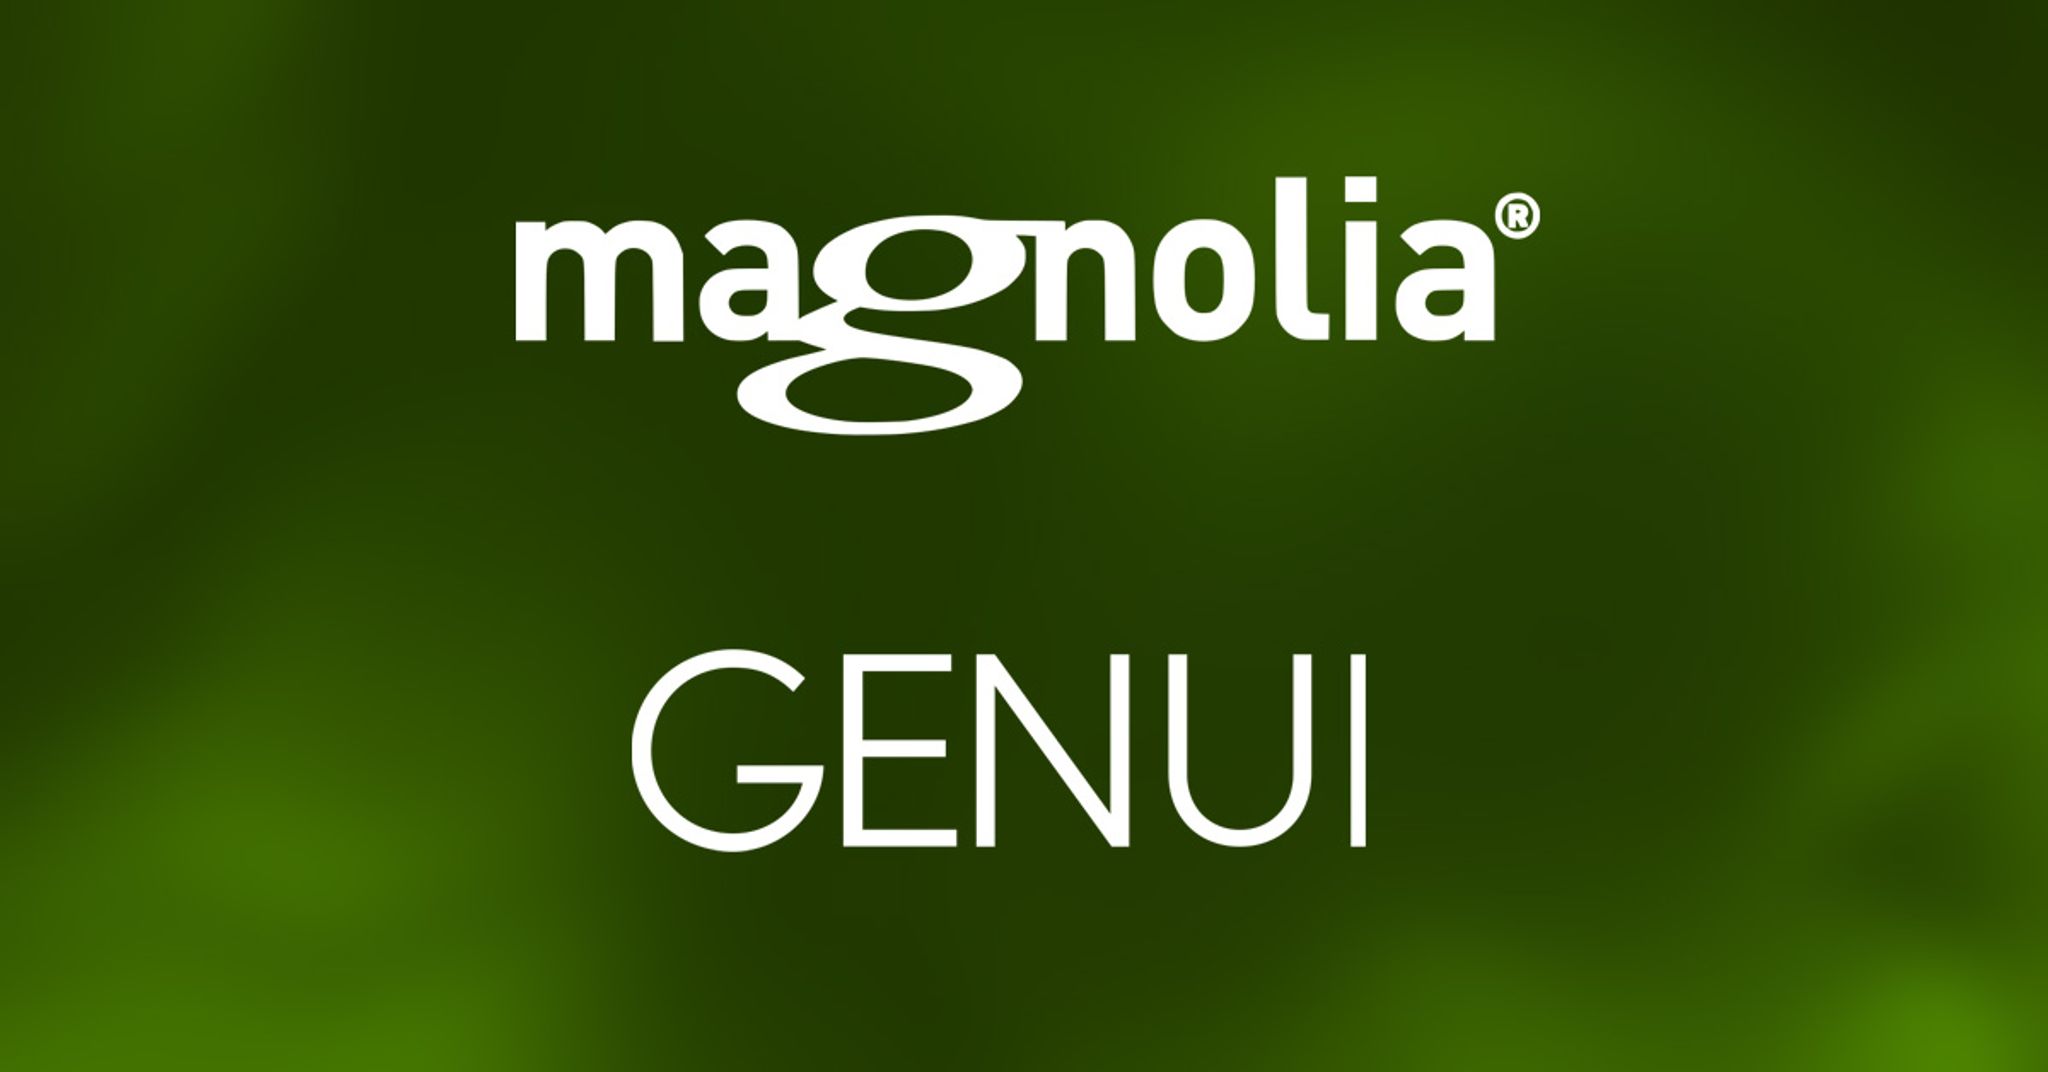 Image of Magnolia and Genui logos against a green background